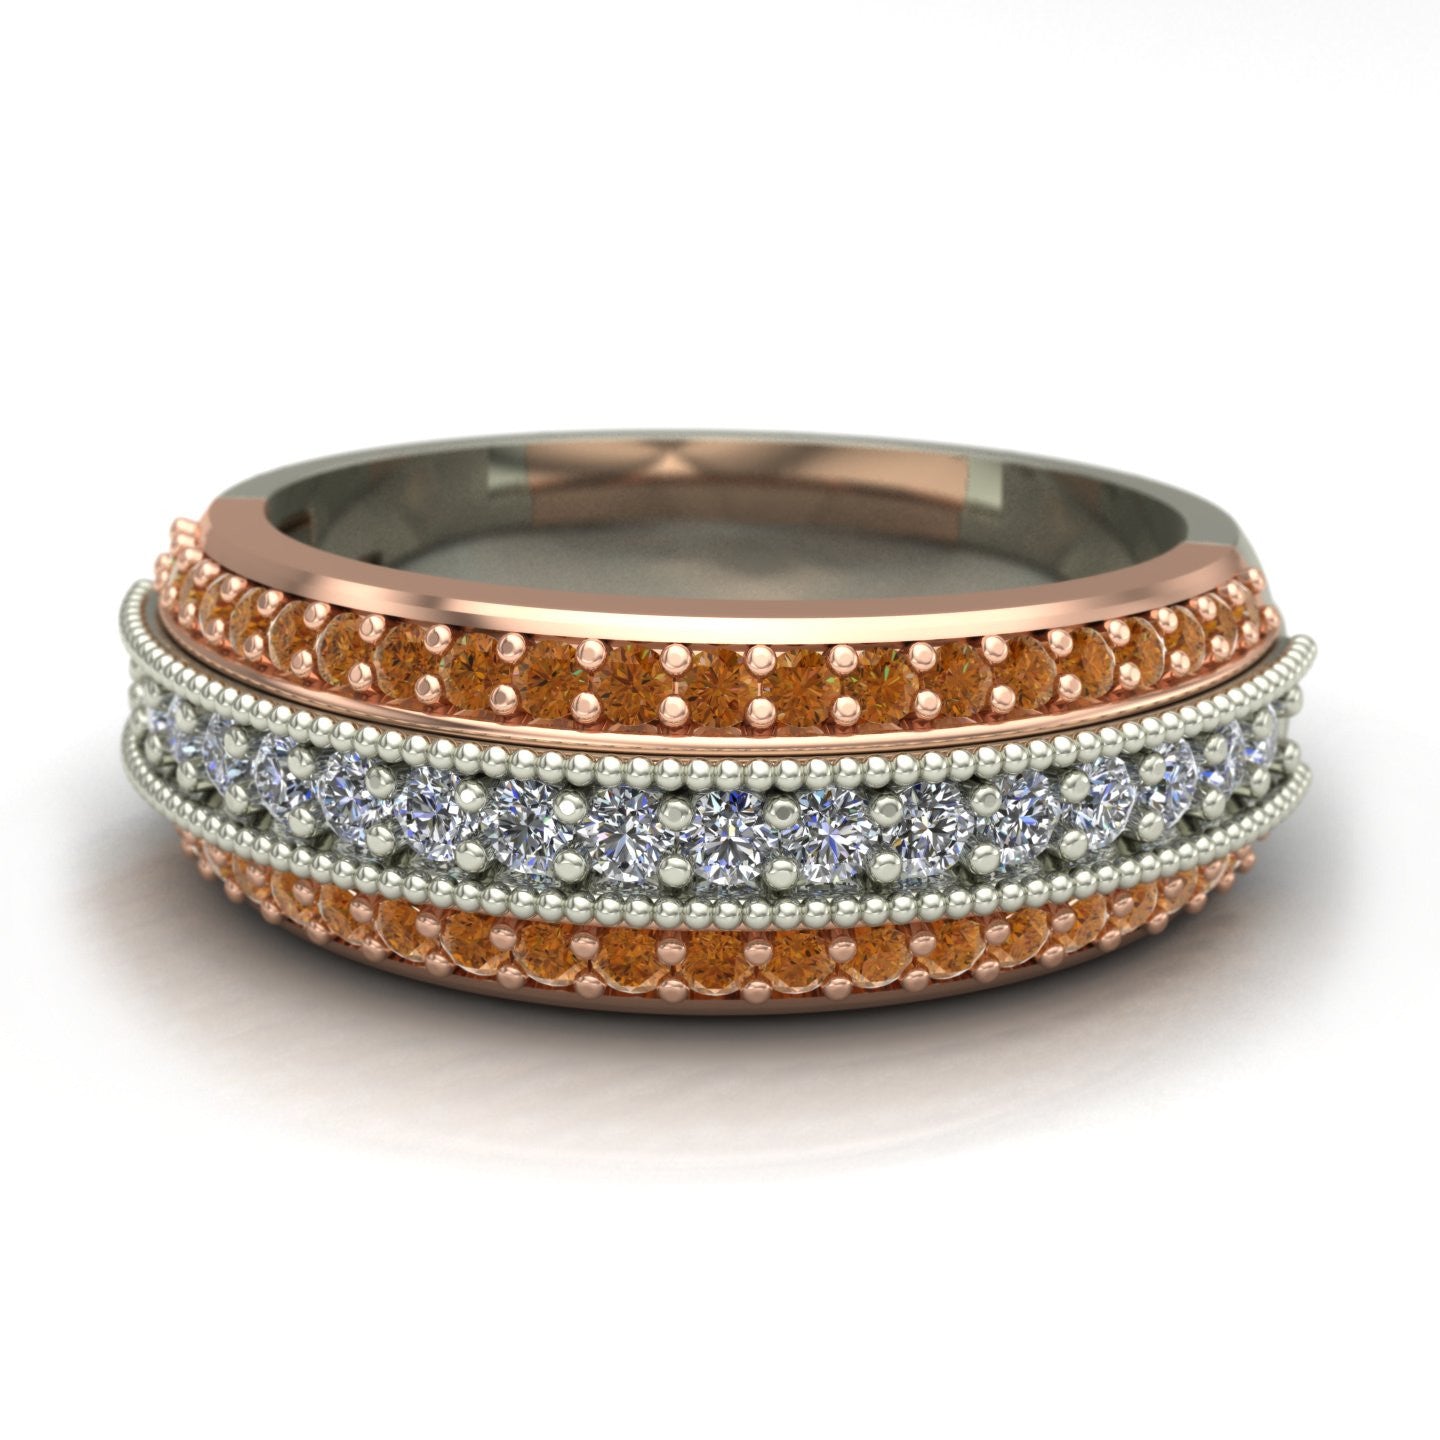 White and cognac diamond band in 14kwhite and rose gold - Charles Babb Designs
 - 2